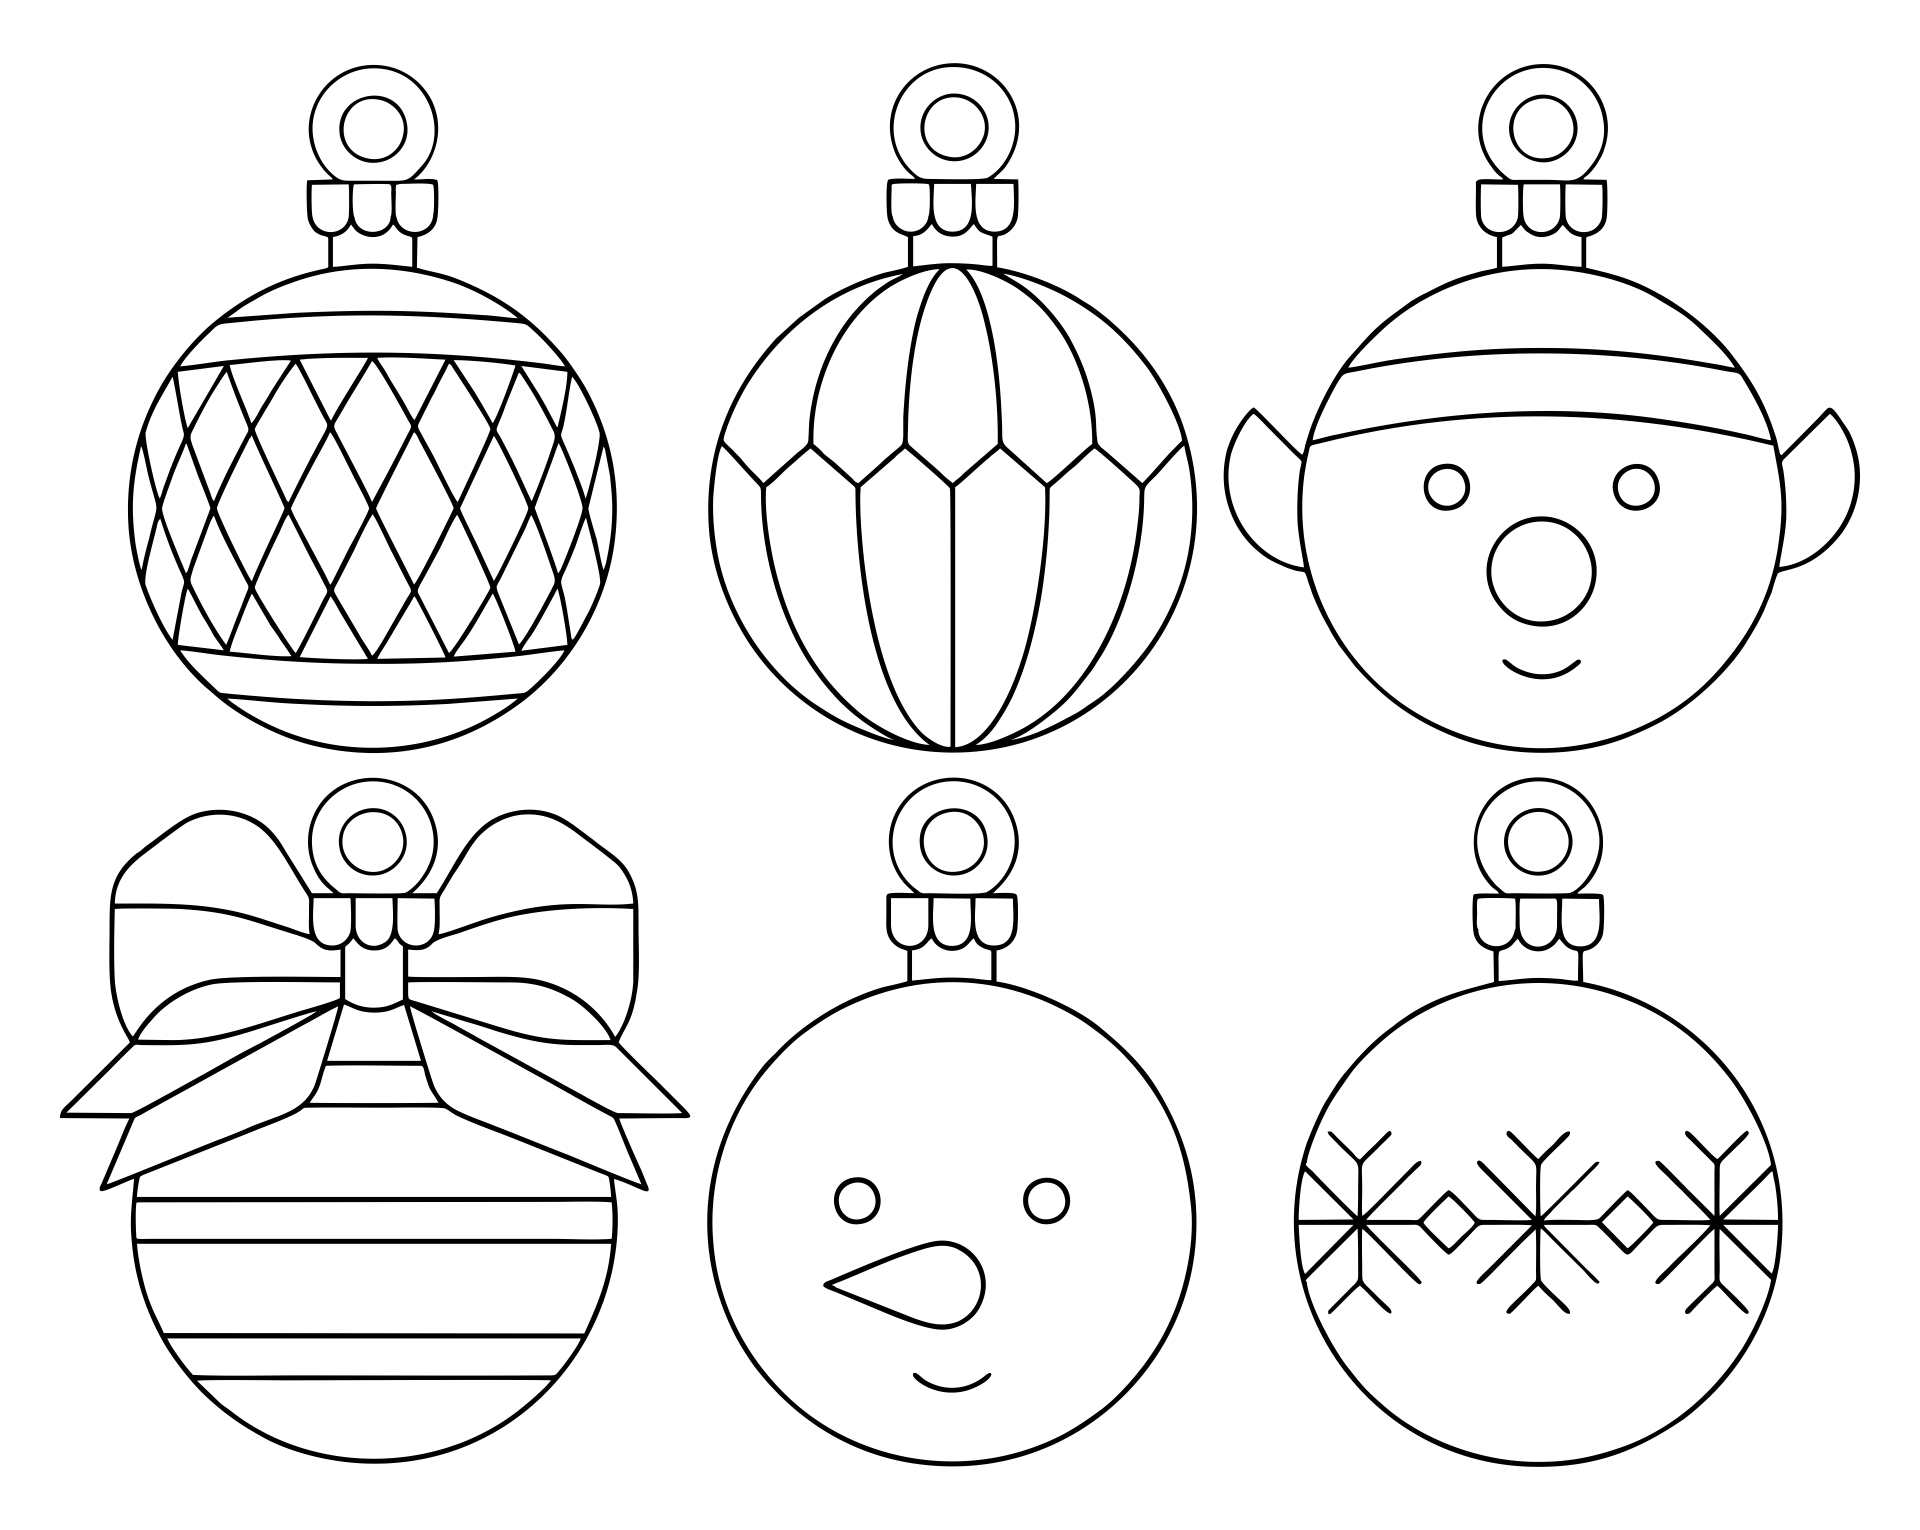 cut-out-printable-christmas-decorations